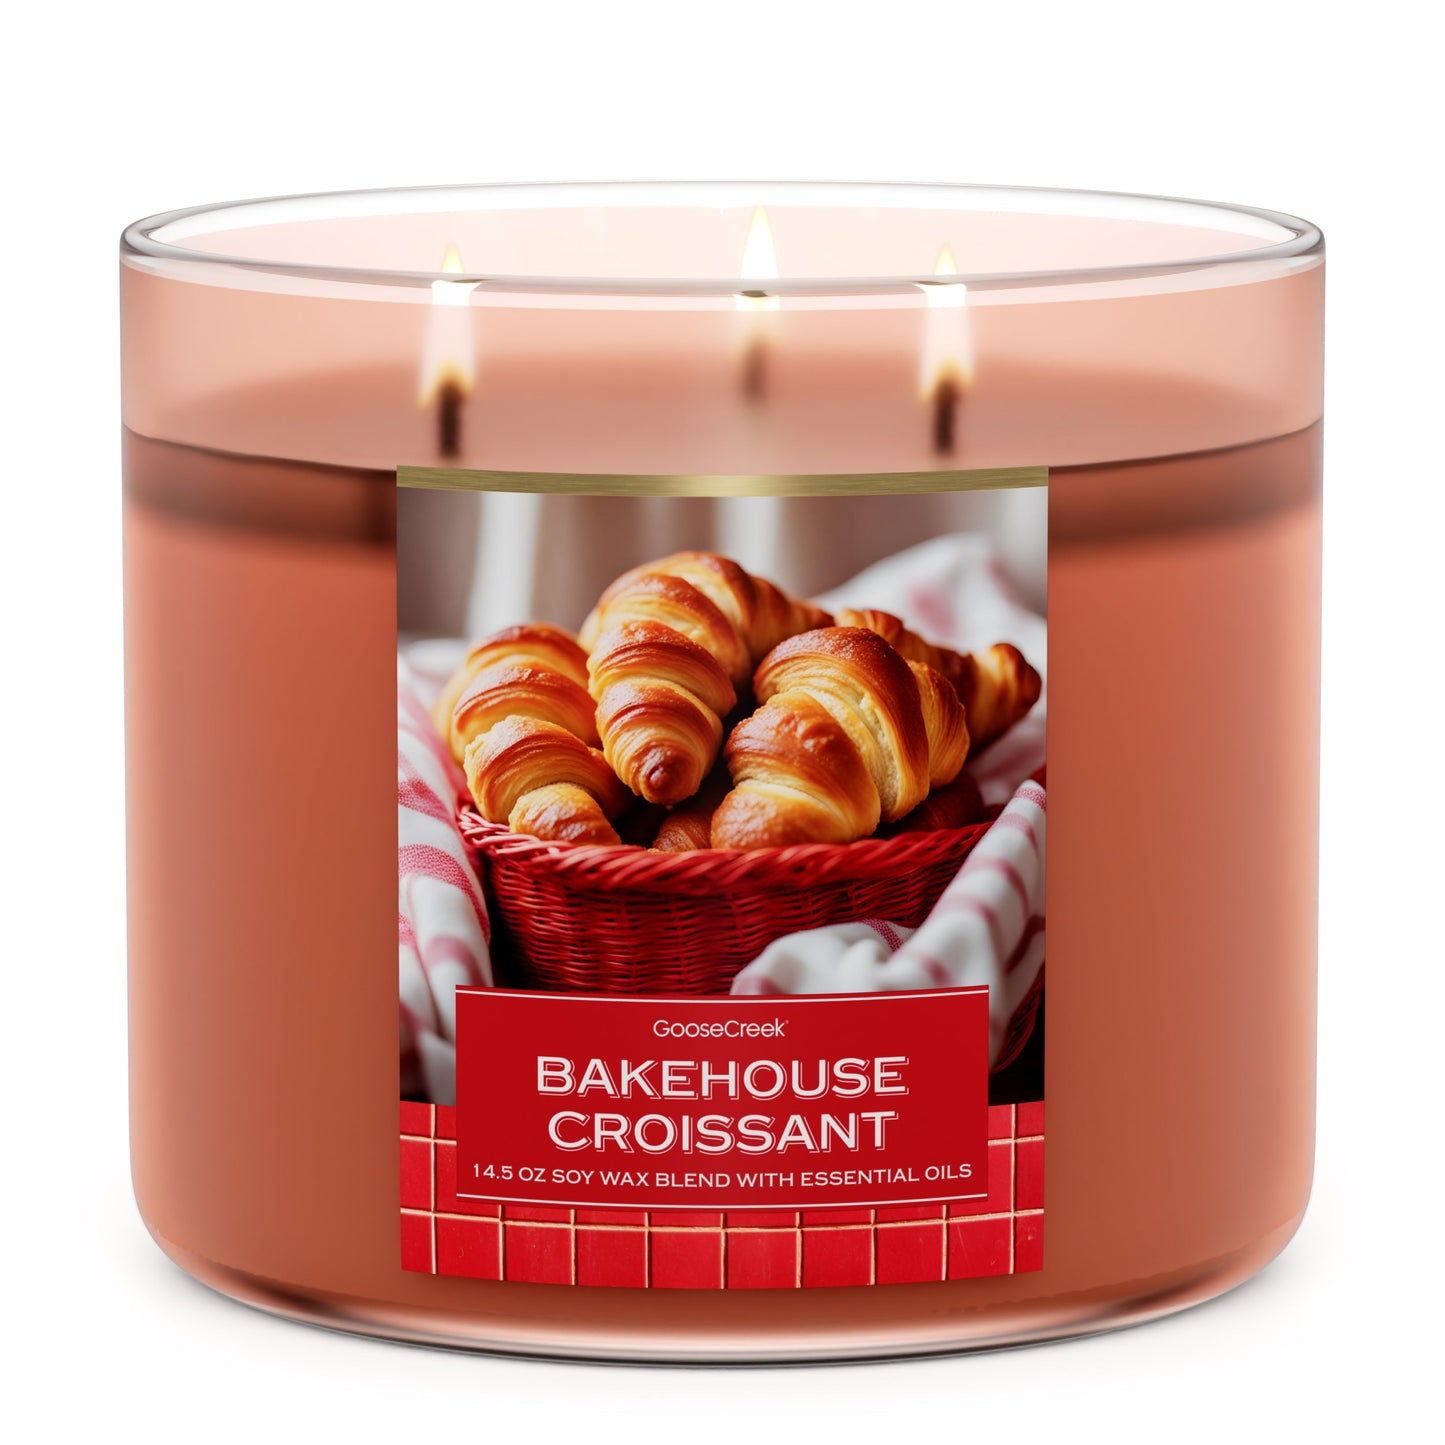 Bakehouse Croissant Large 3-Wick Candle